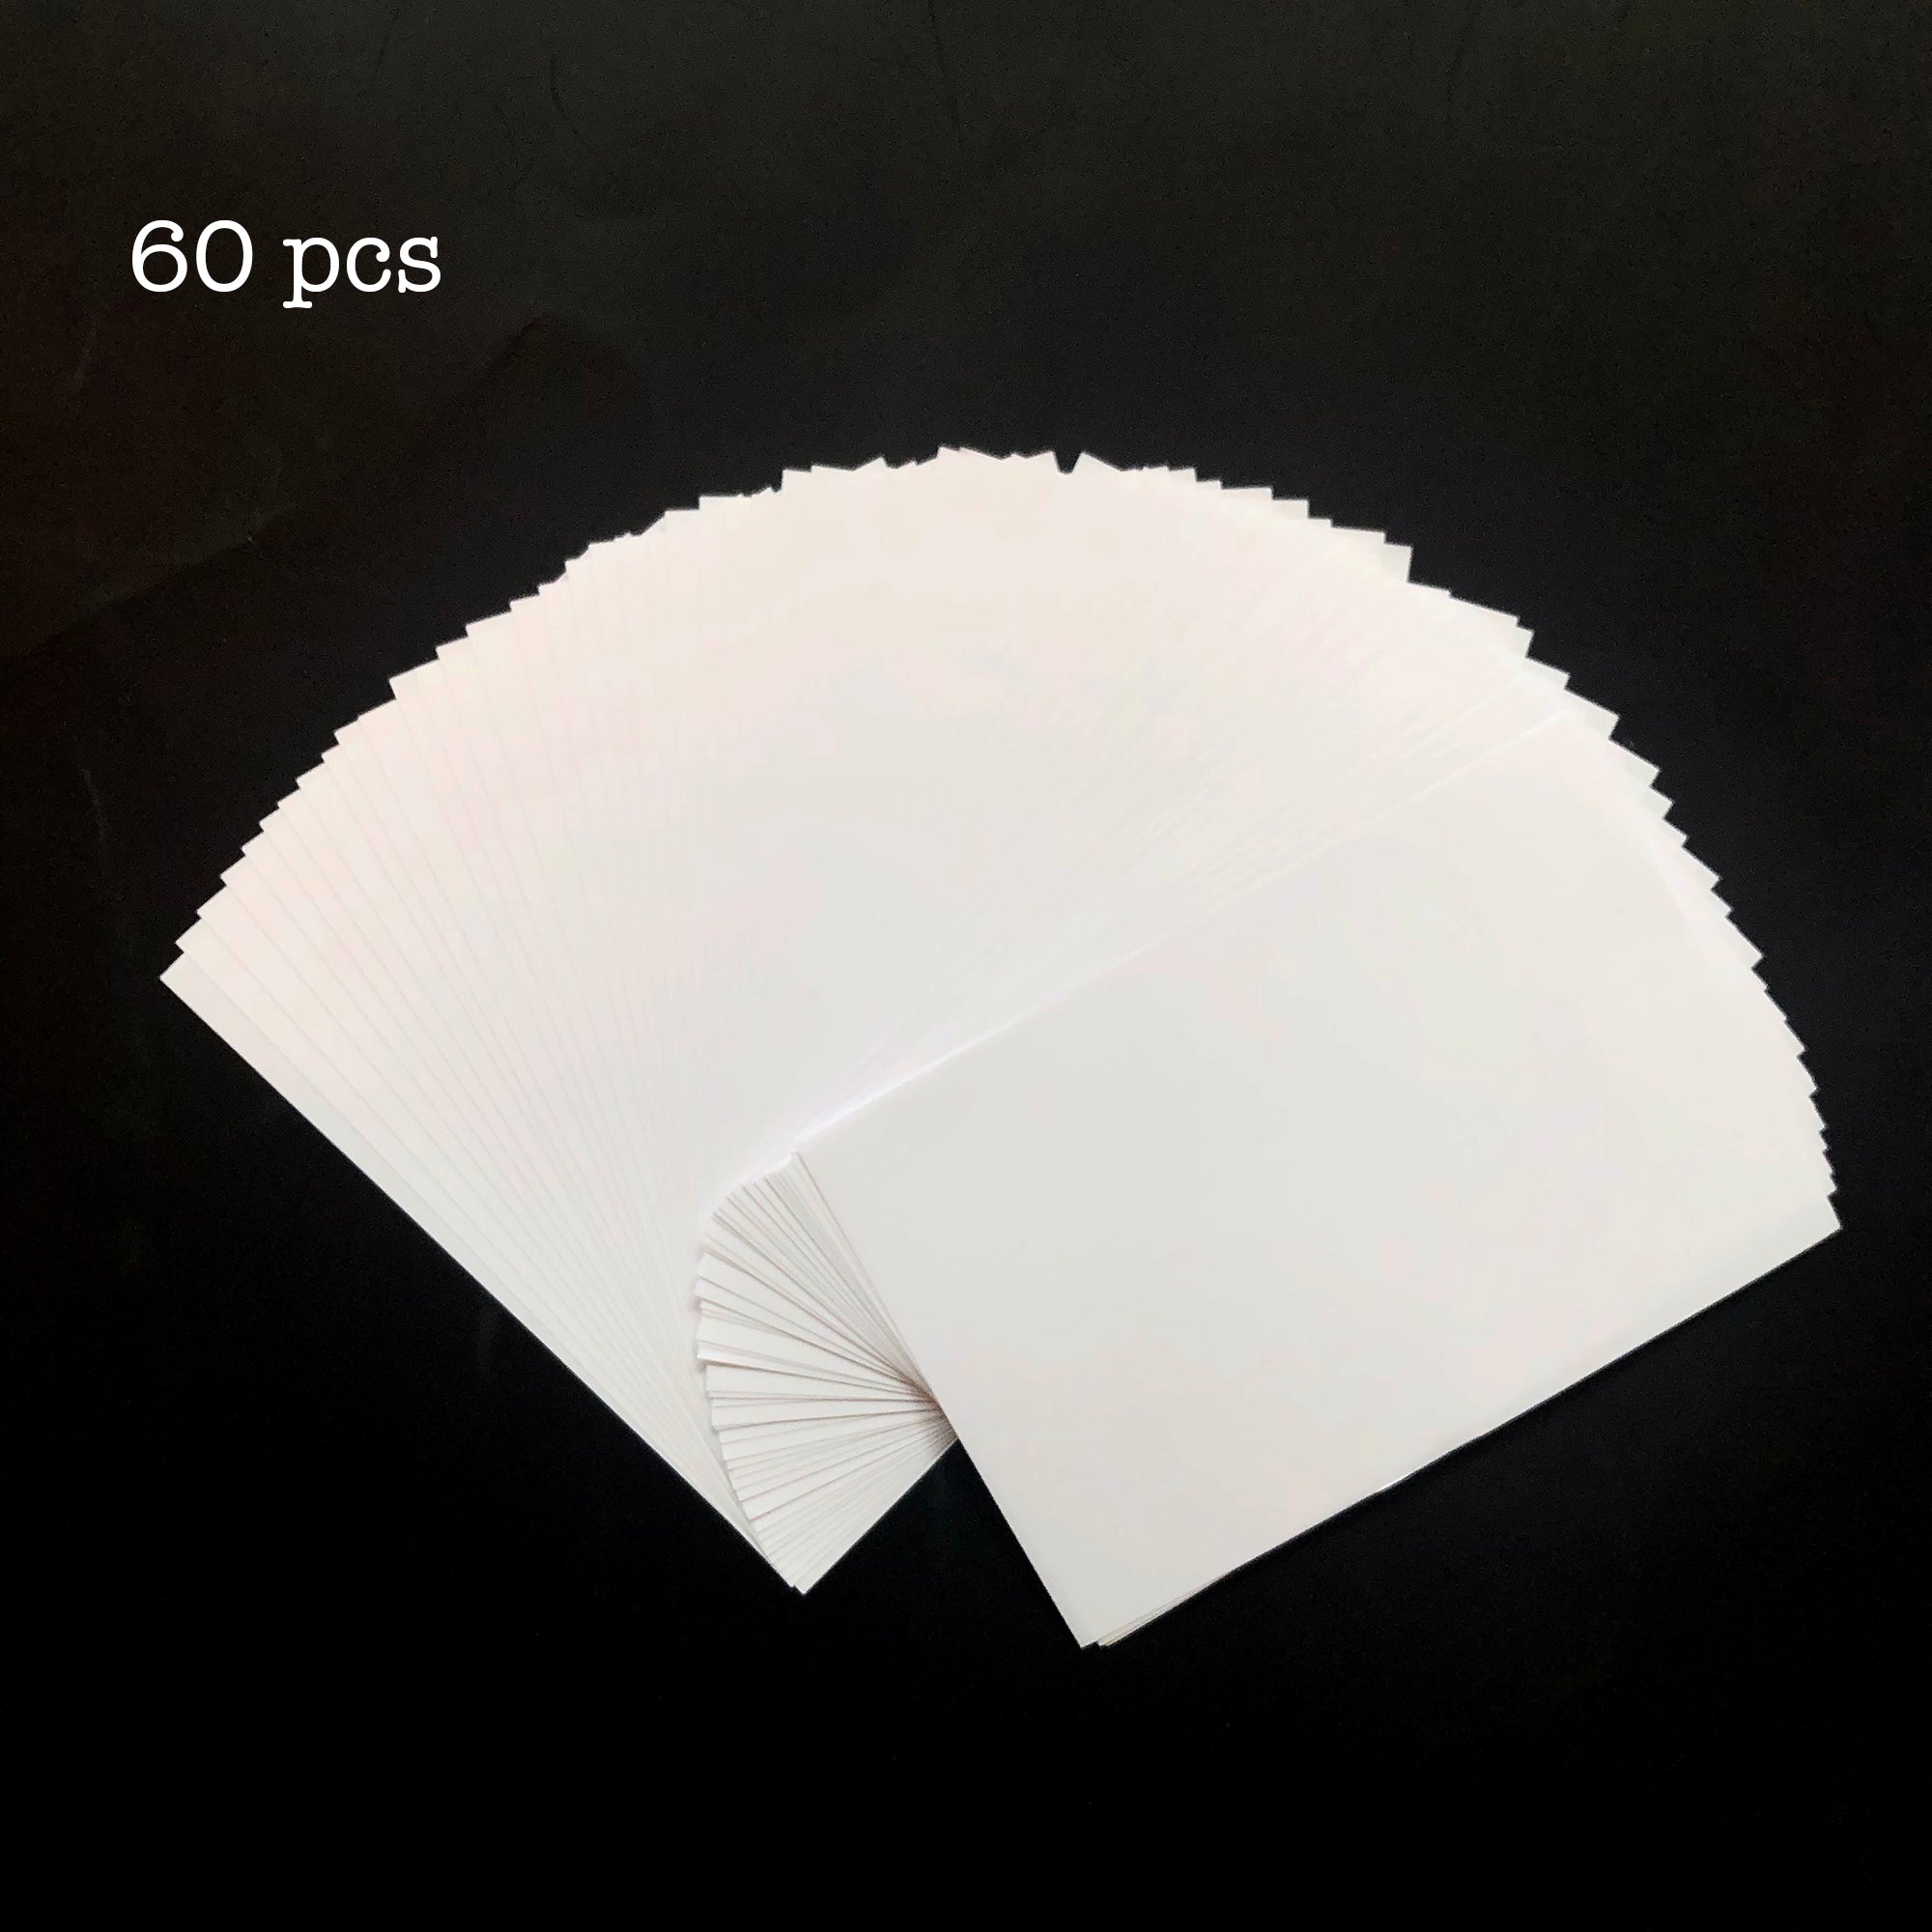 Staroar 5D Diamond Painting - 60 Pcs Pack of Release Paper 120x160mm Diamond Painting Cover Replacement